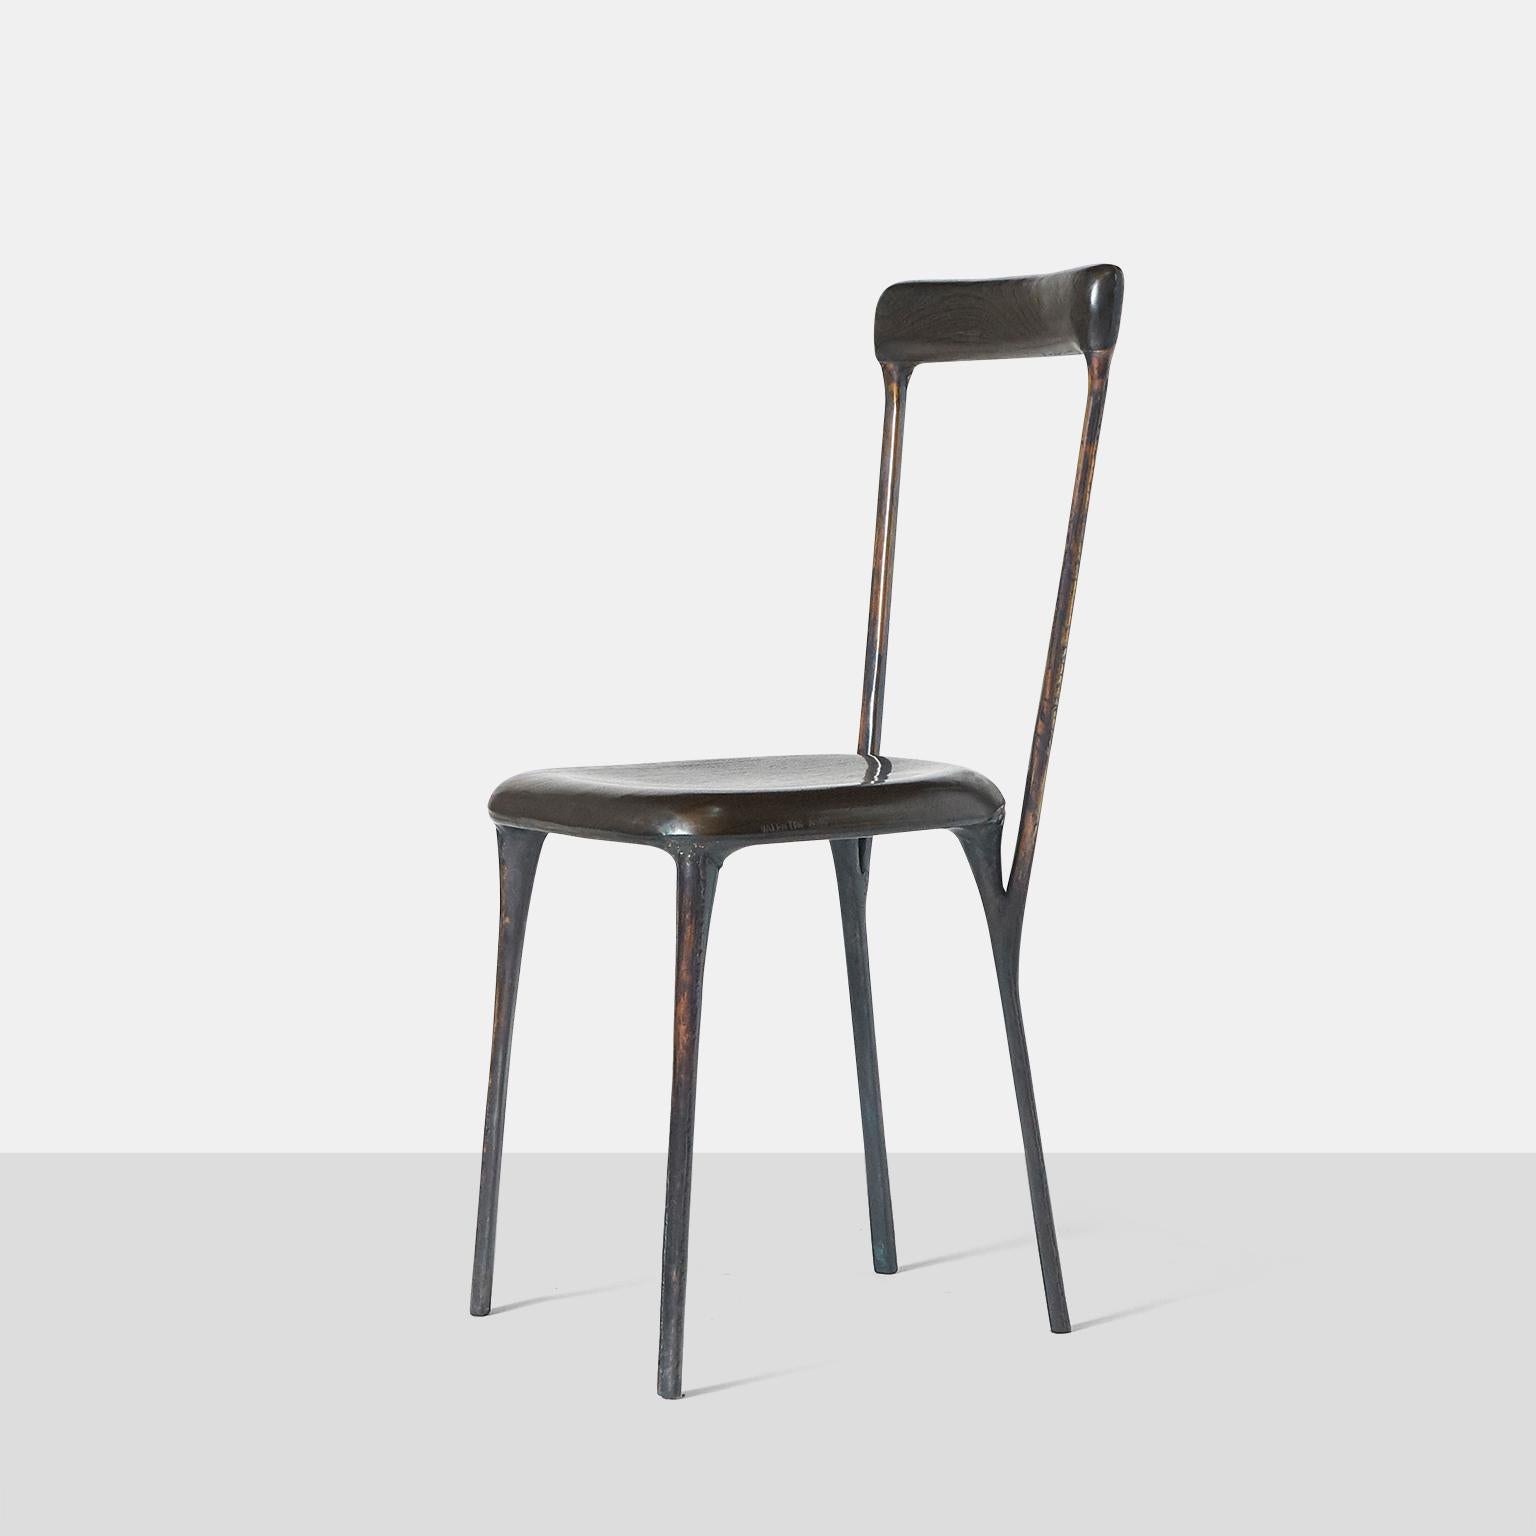 A side chair by German furniture designer Valentin Loellmann, circa 2017. Completely hand constructed in bcopper and not cast, with a charred oak seat and back in wenge that has been made to fit the curved shape. The brass construction creates a